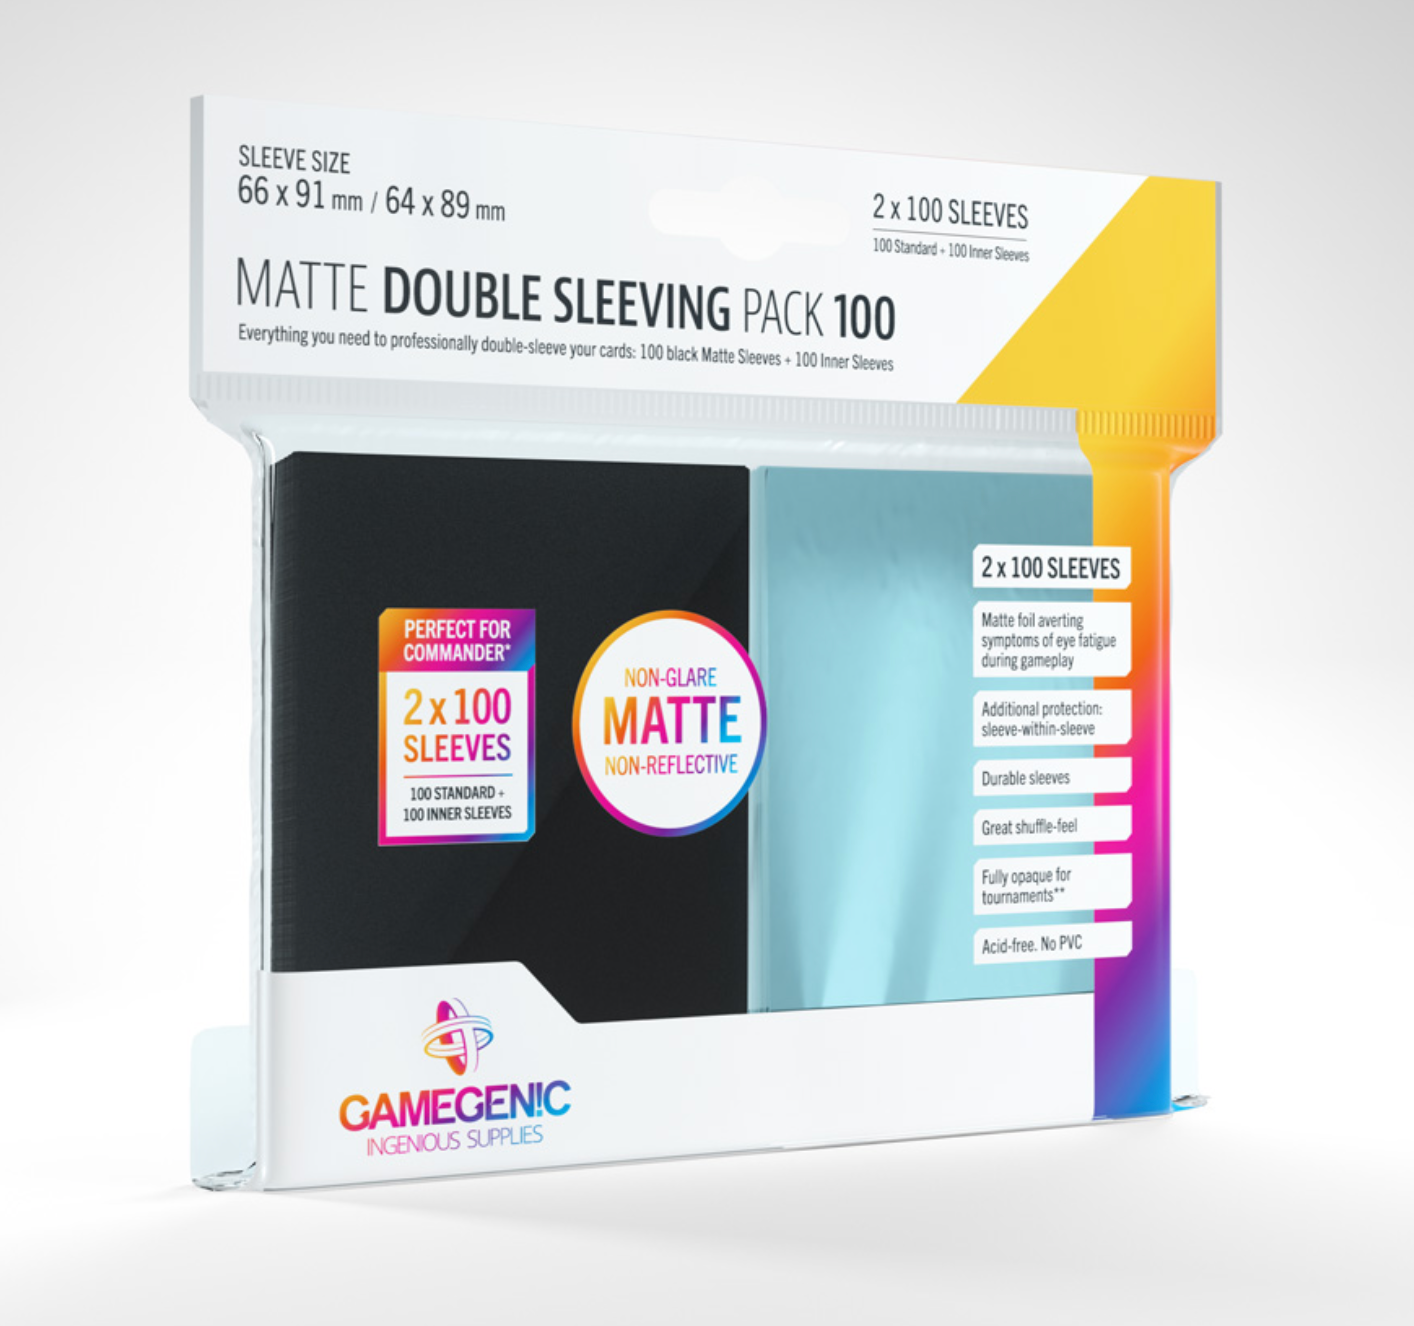 Gamegenic Matte Double Sleeves (100 pack)